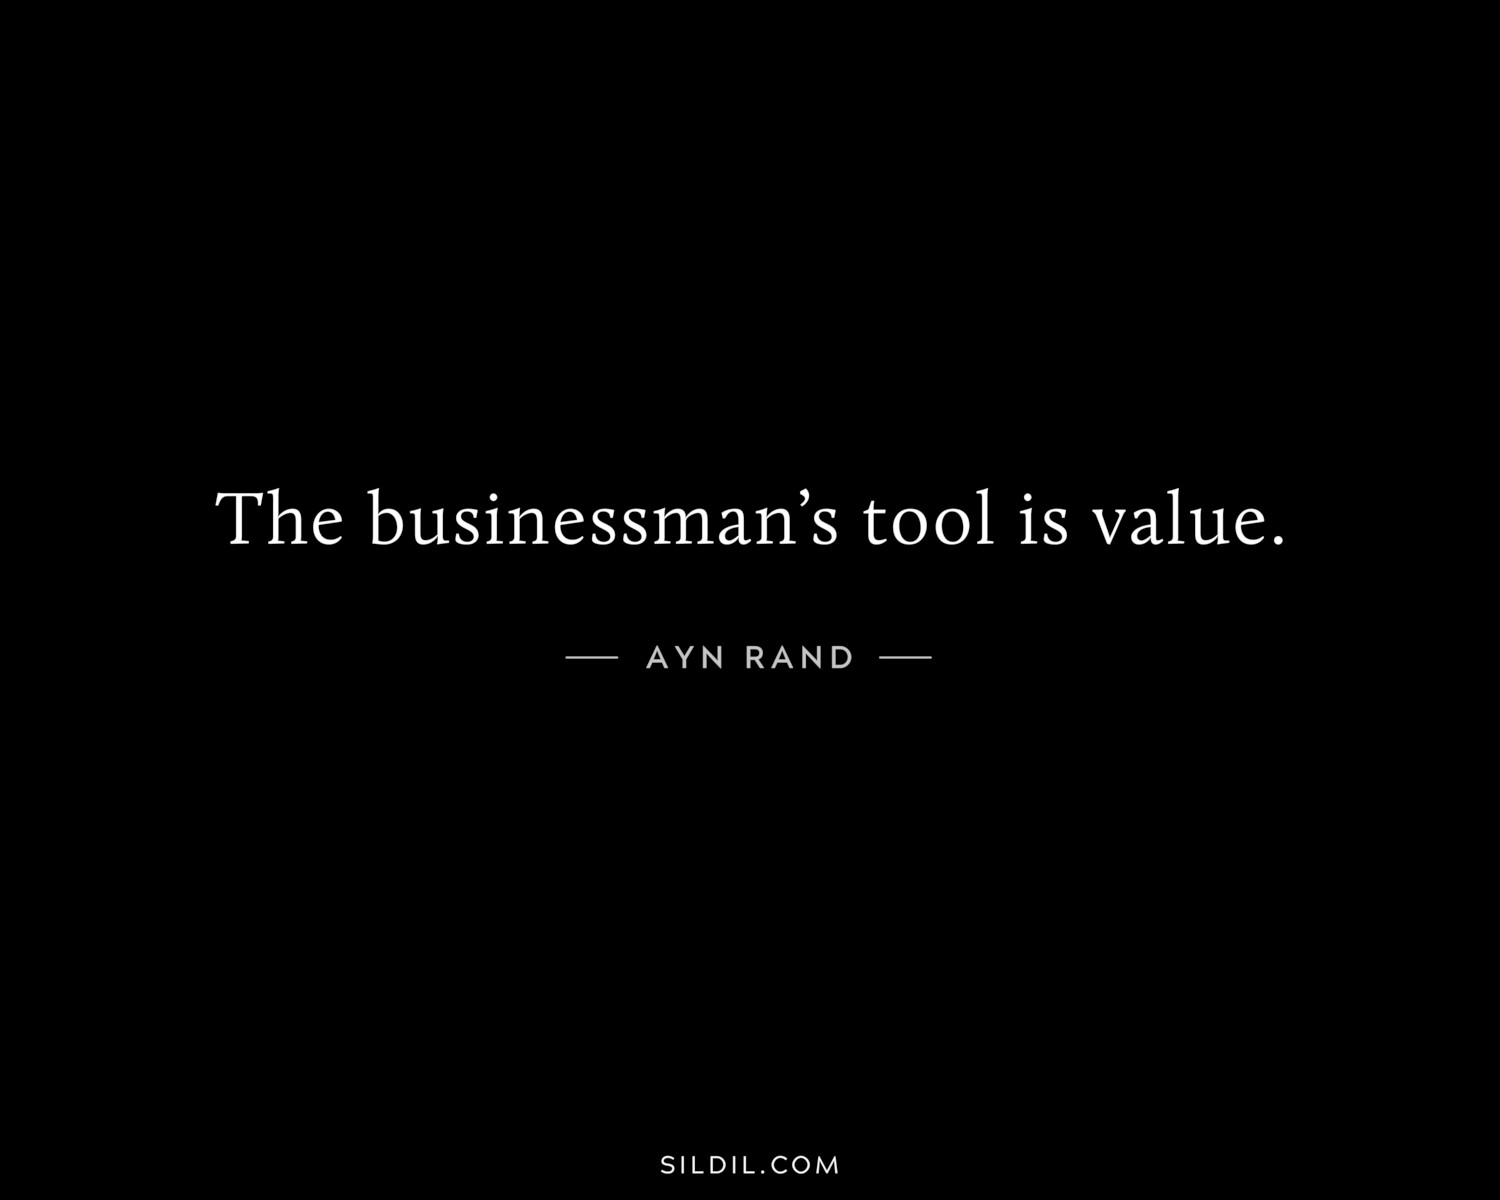 The businessman’s tool is value.